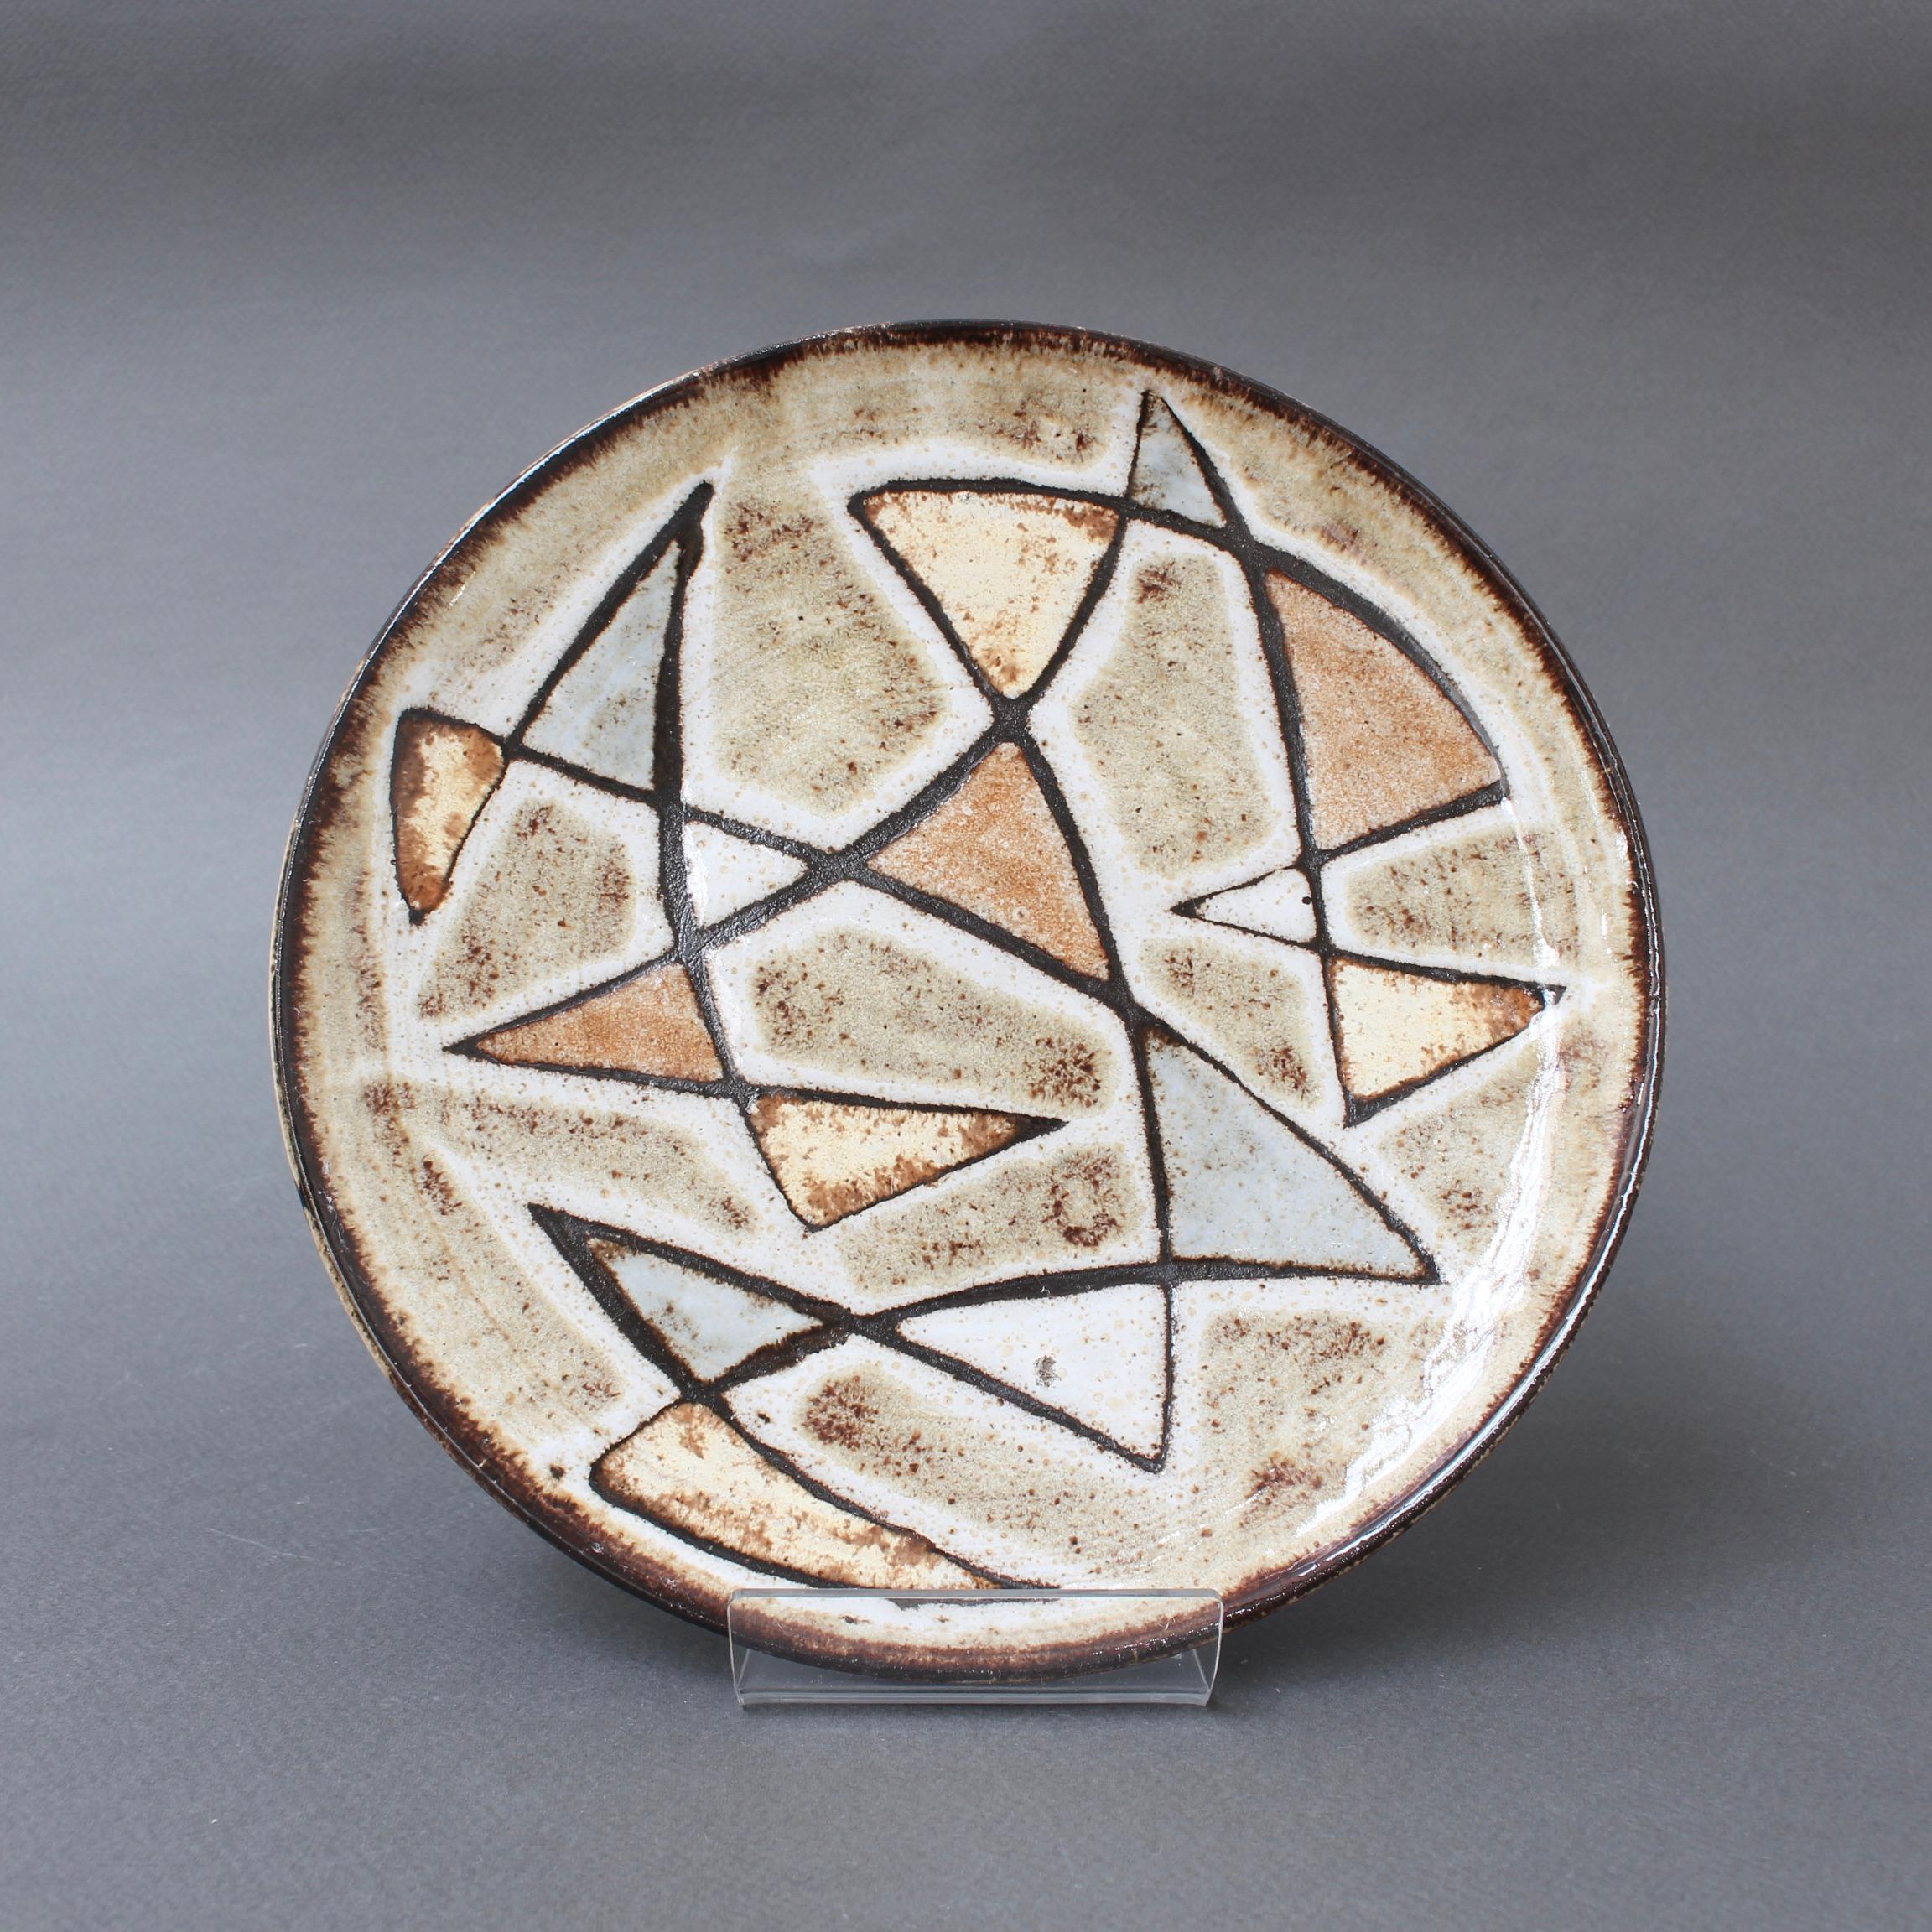 Decorative ceramic plate by Robert Perot, founder of the pottery, Vieux Moulin (circa 1950s), Vallauris, France. Exquisite design with geometric shapes in very muted shades of brown, blue, yellow and green. This is an authentic, collectible